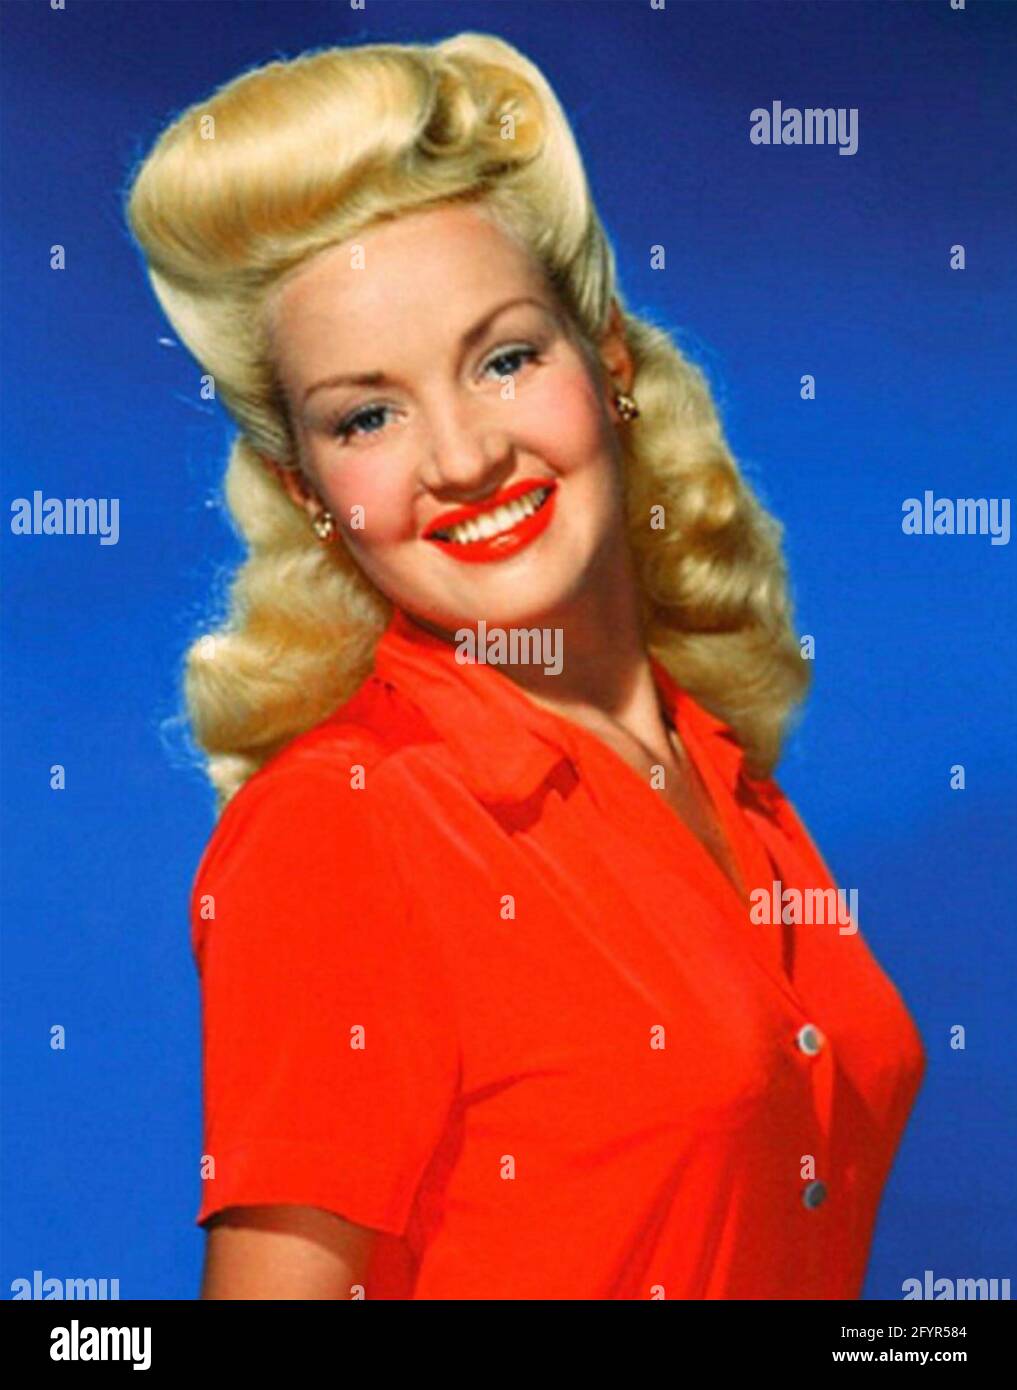 BETTY GRABLE (1916-1973) American film actress about 1942 Stock Photo